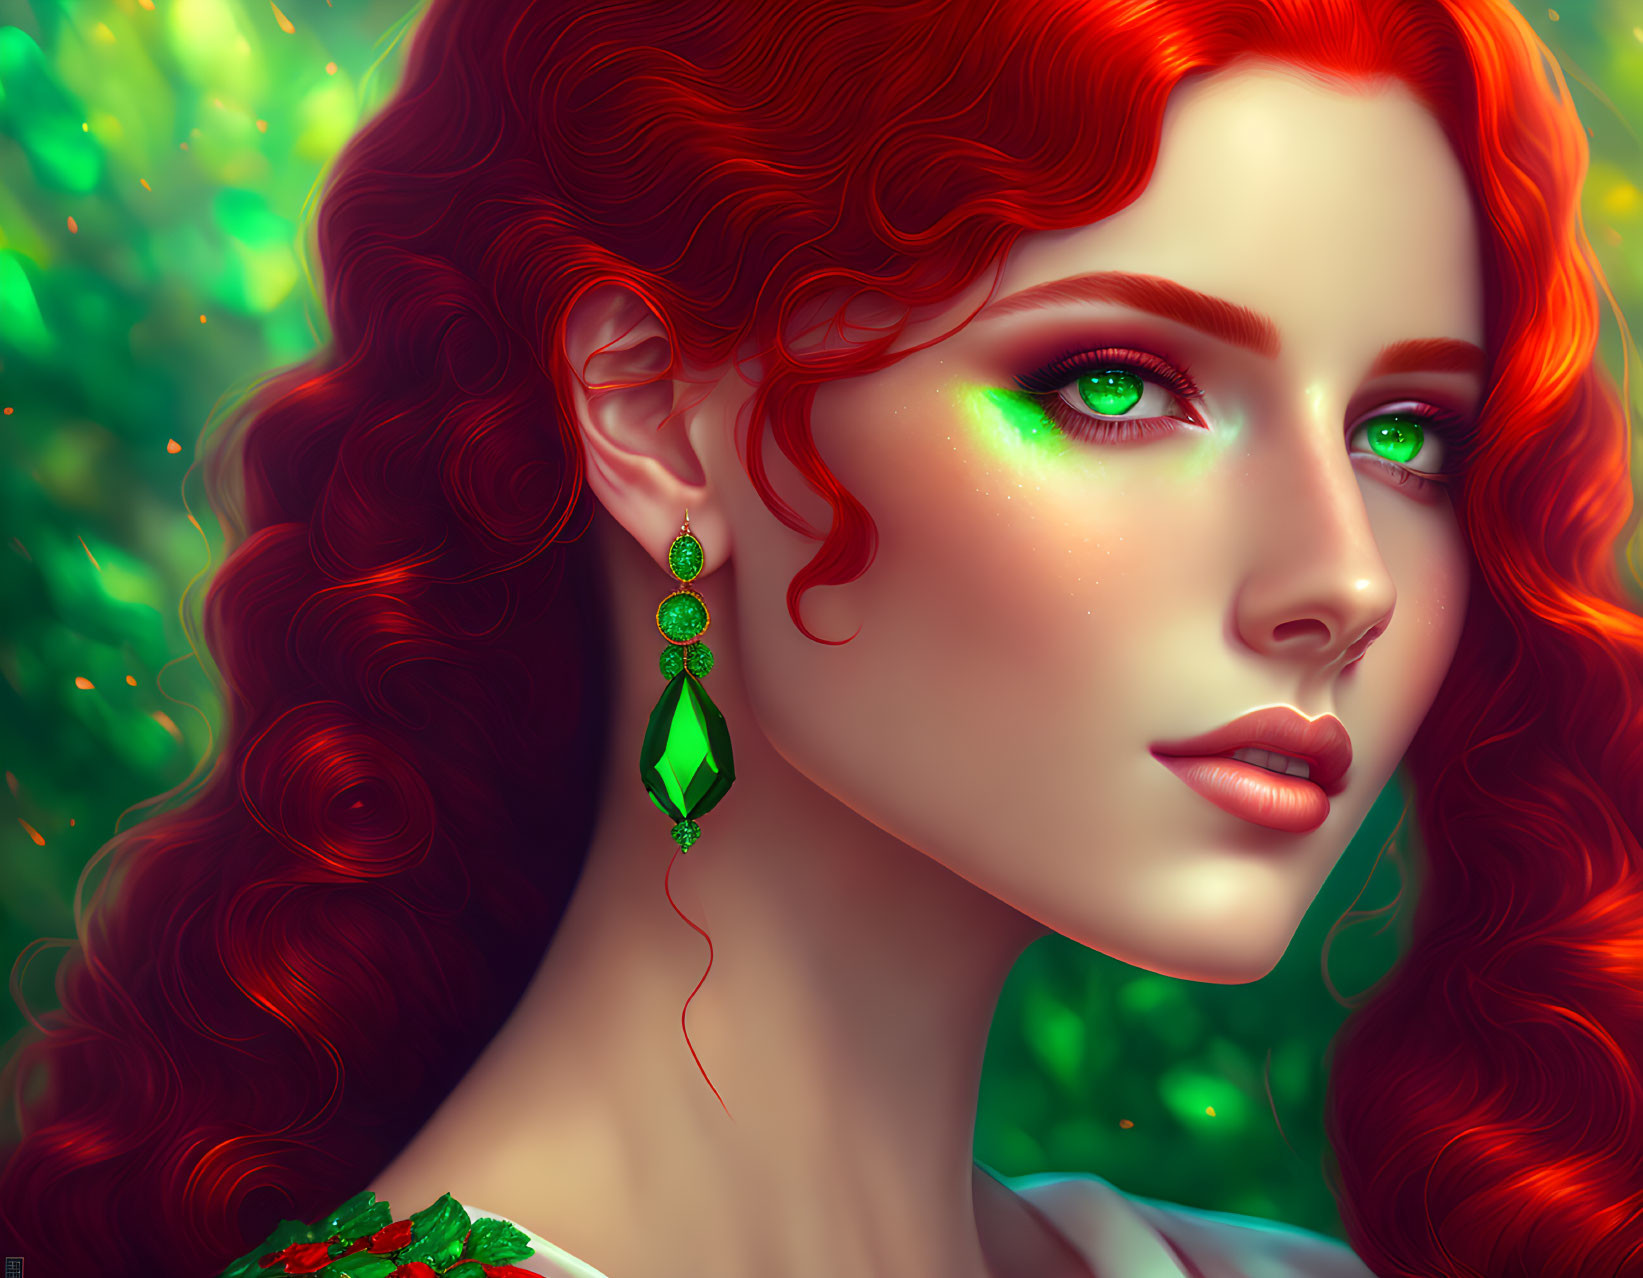 Vibrant red-haired woman with green eyes and earrings in lush greenery